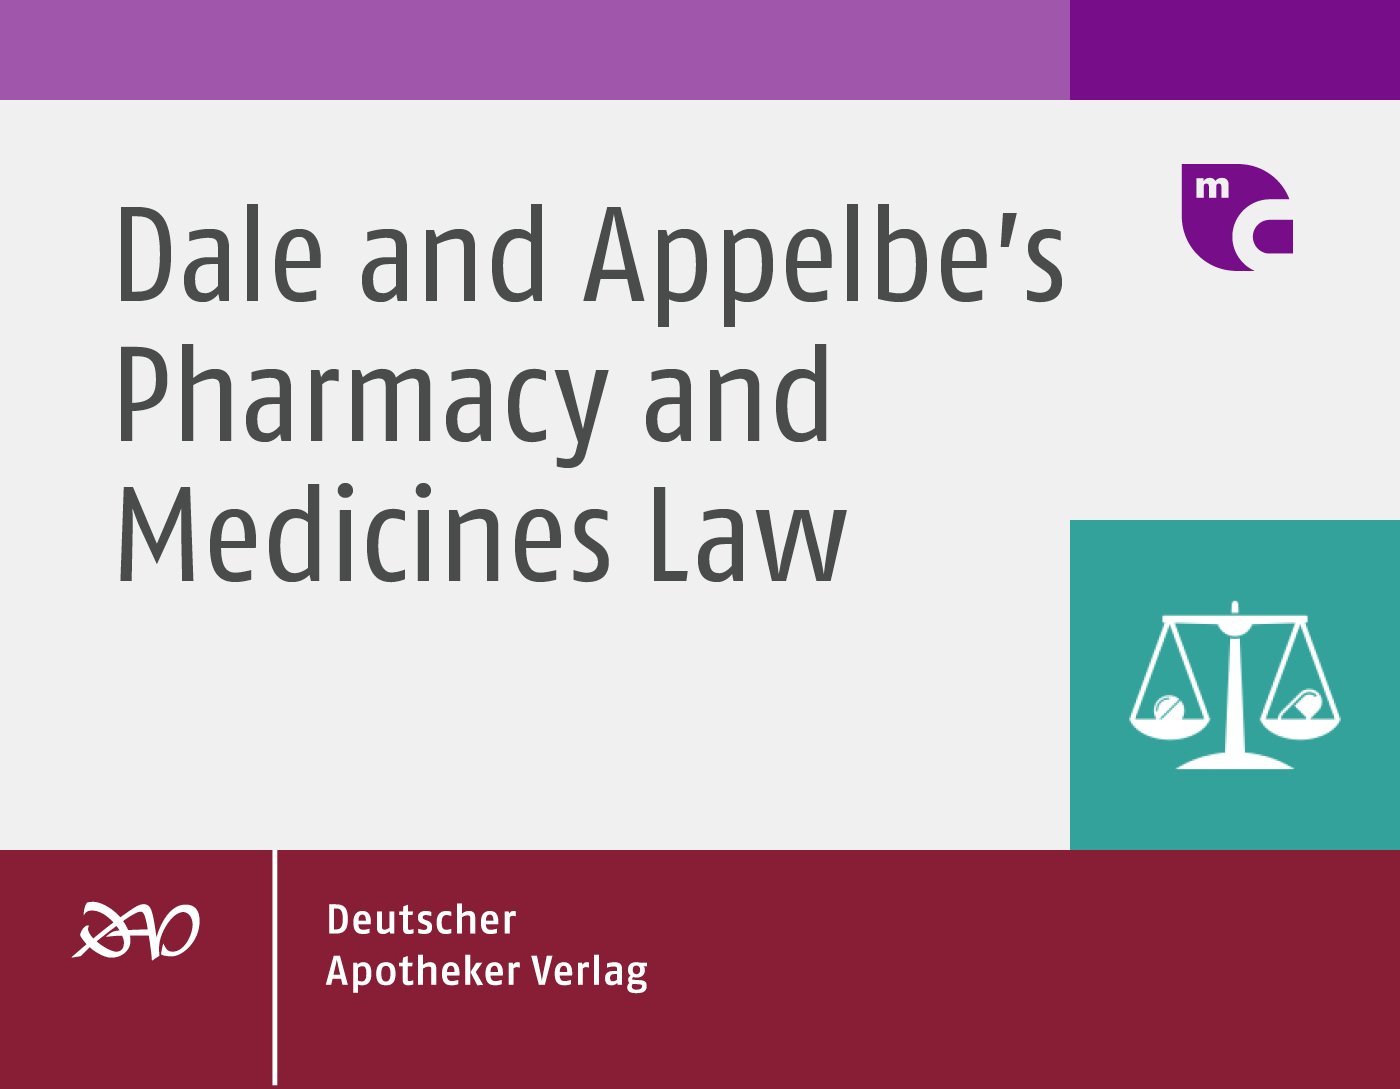 Dale and Appelbe's Pharmacy and Medicines Law